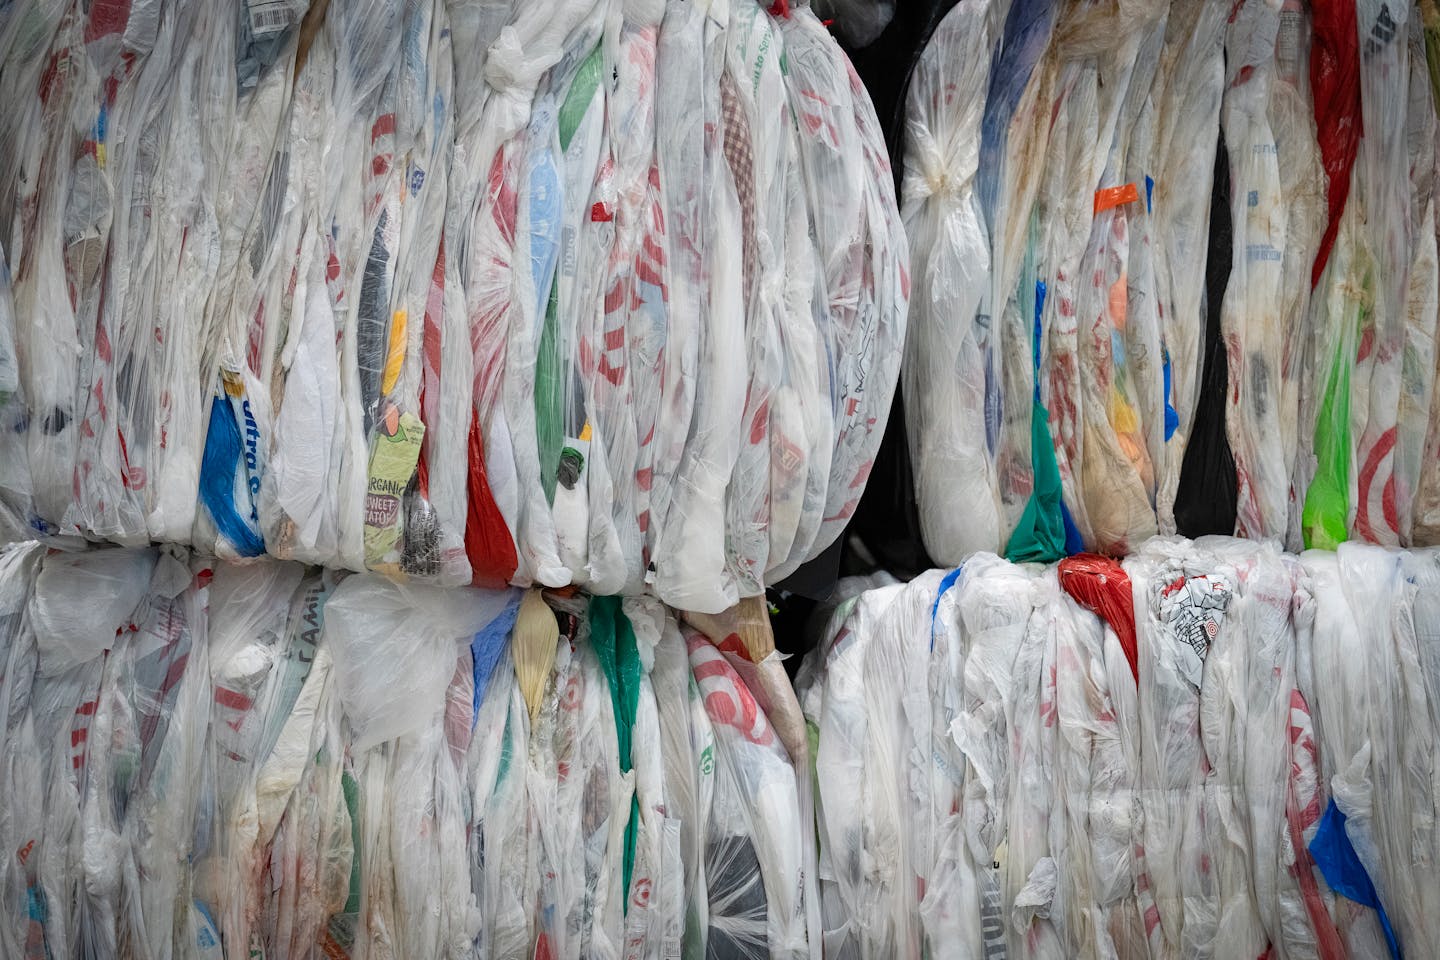 New Jersey Plastic Bag Ban Goes Bust - WSJ